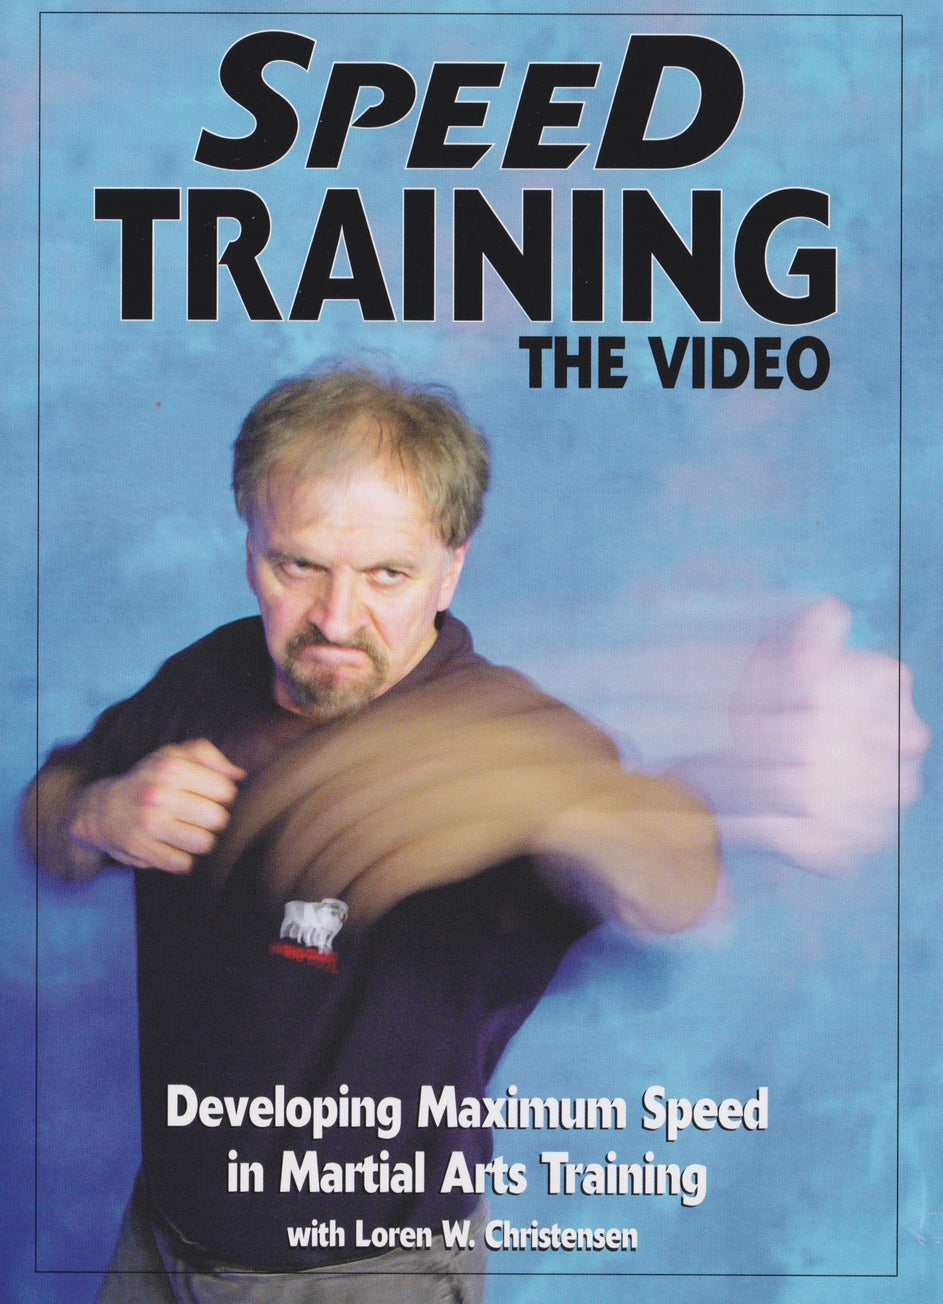 Speed Training: Developing Maximum Speed in Martial Arts Training DVD by Loren Christenson (Preowned)